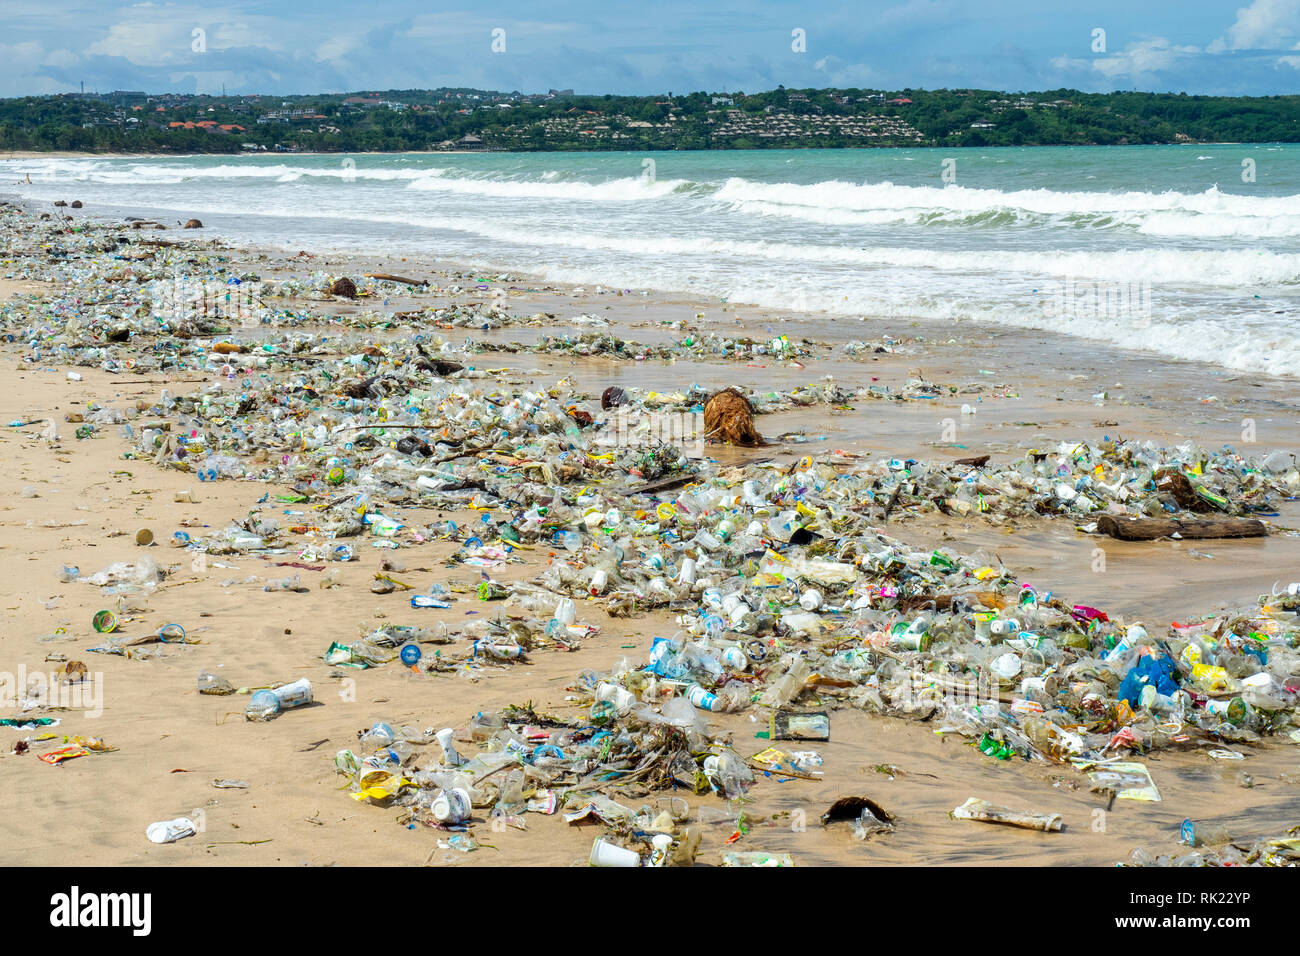 Pollution of plastic bottles, cups, straws and other litter washing up on the beach at Jimbaran Bay, Bali Indonesia. Stock Photo